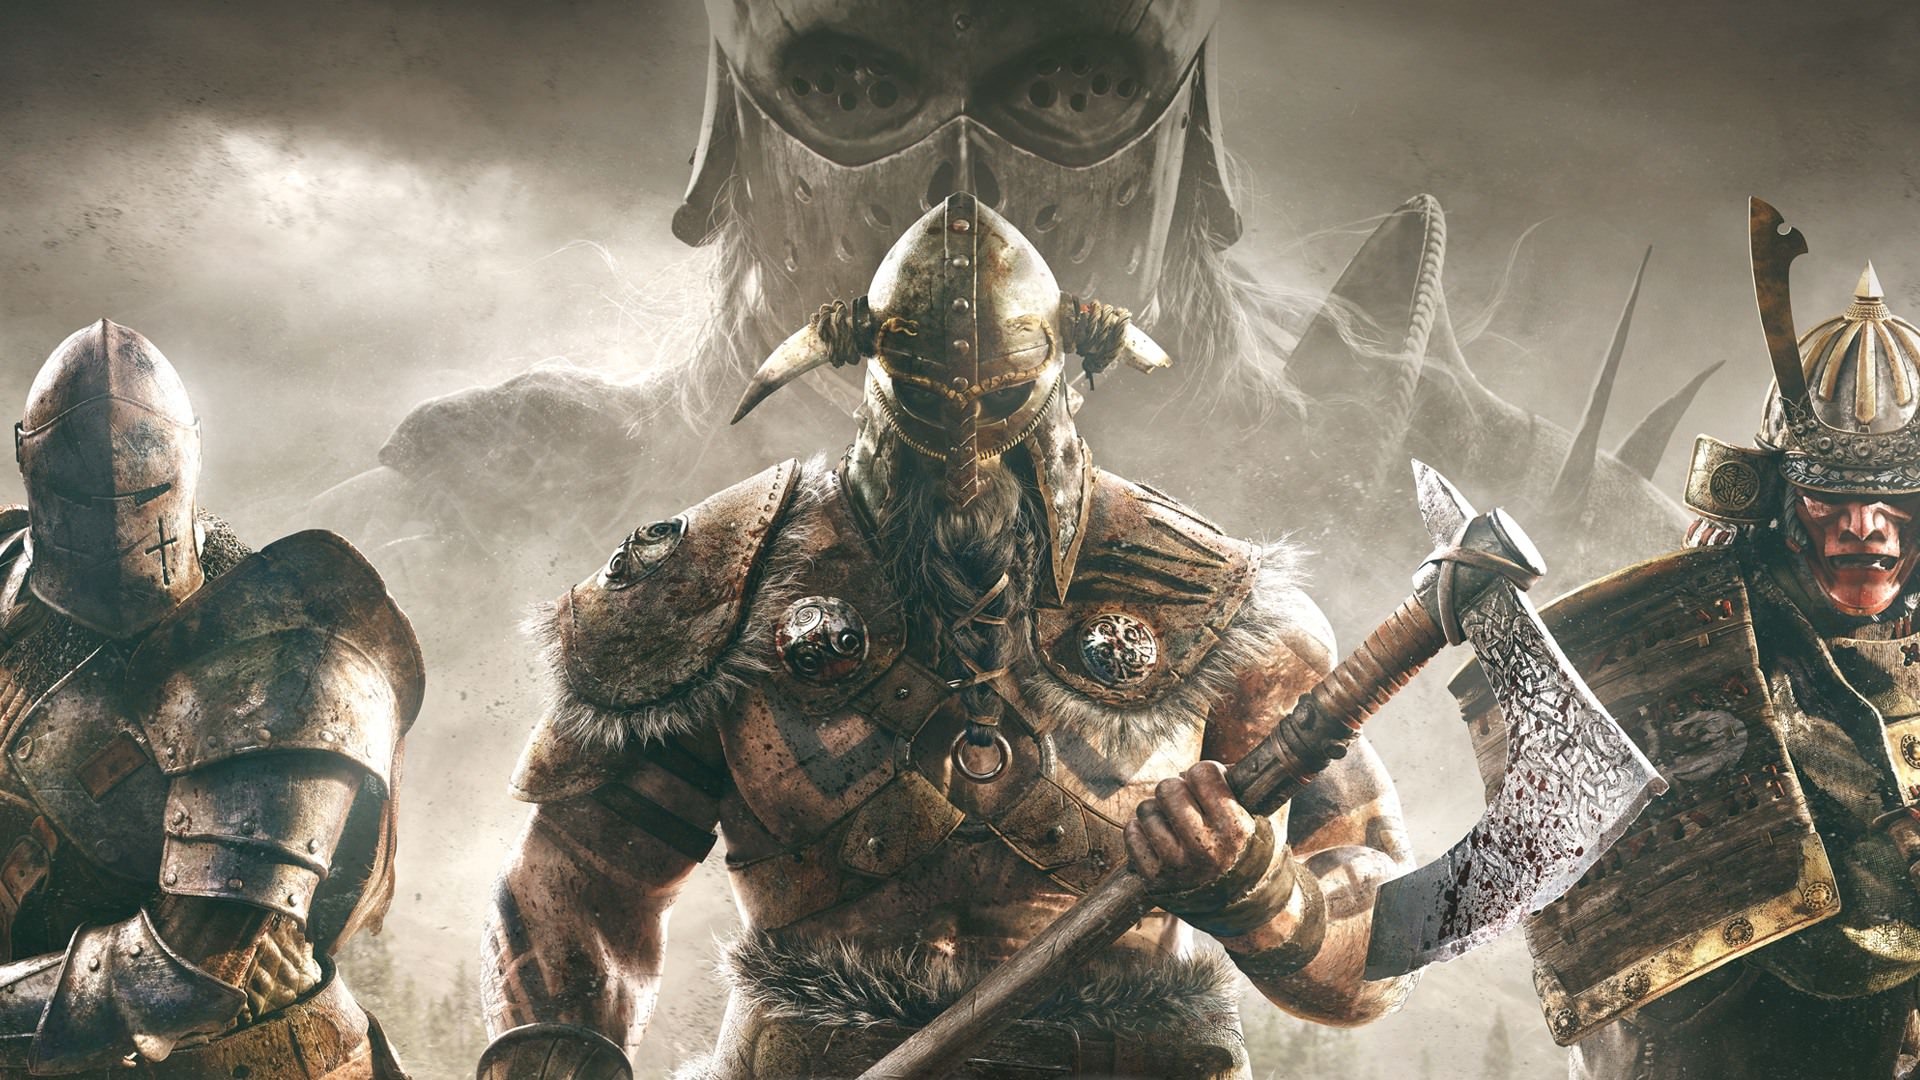 For Honor Wallpapers